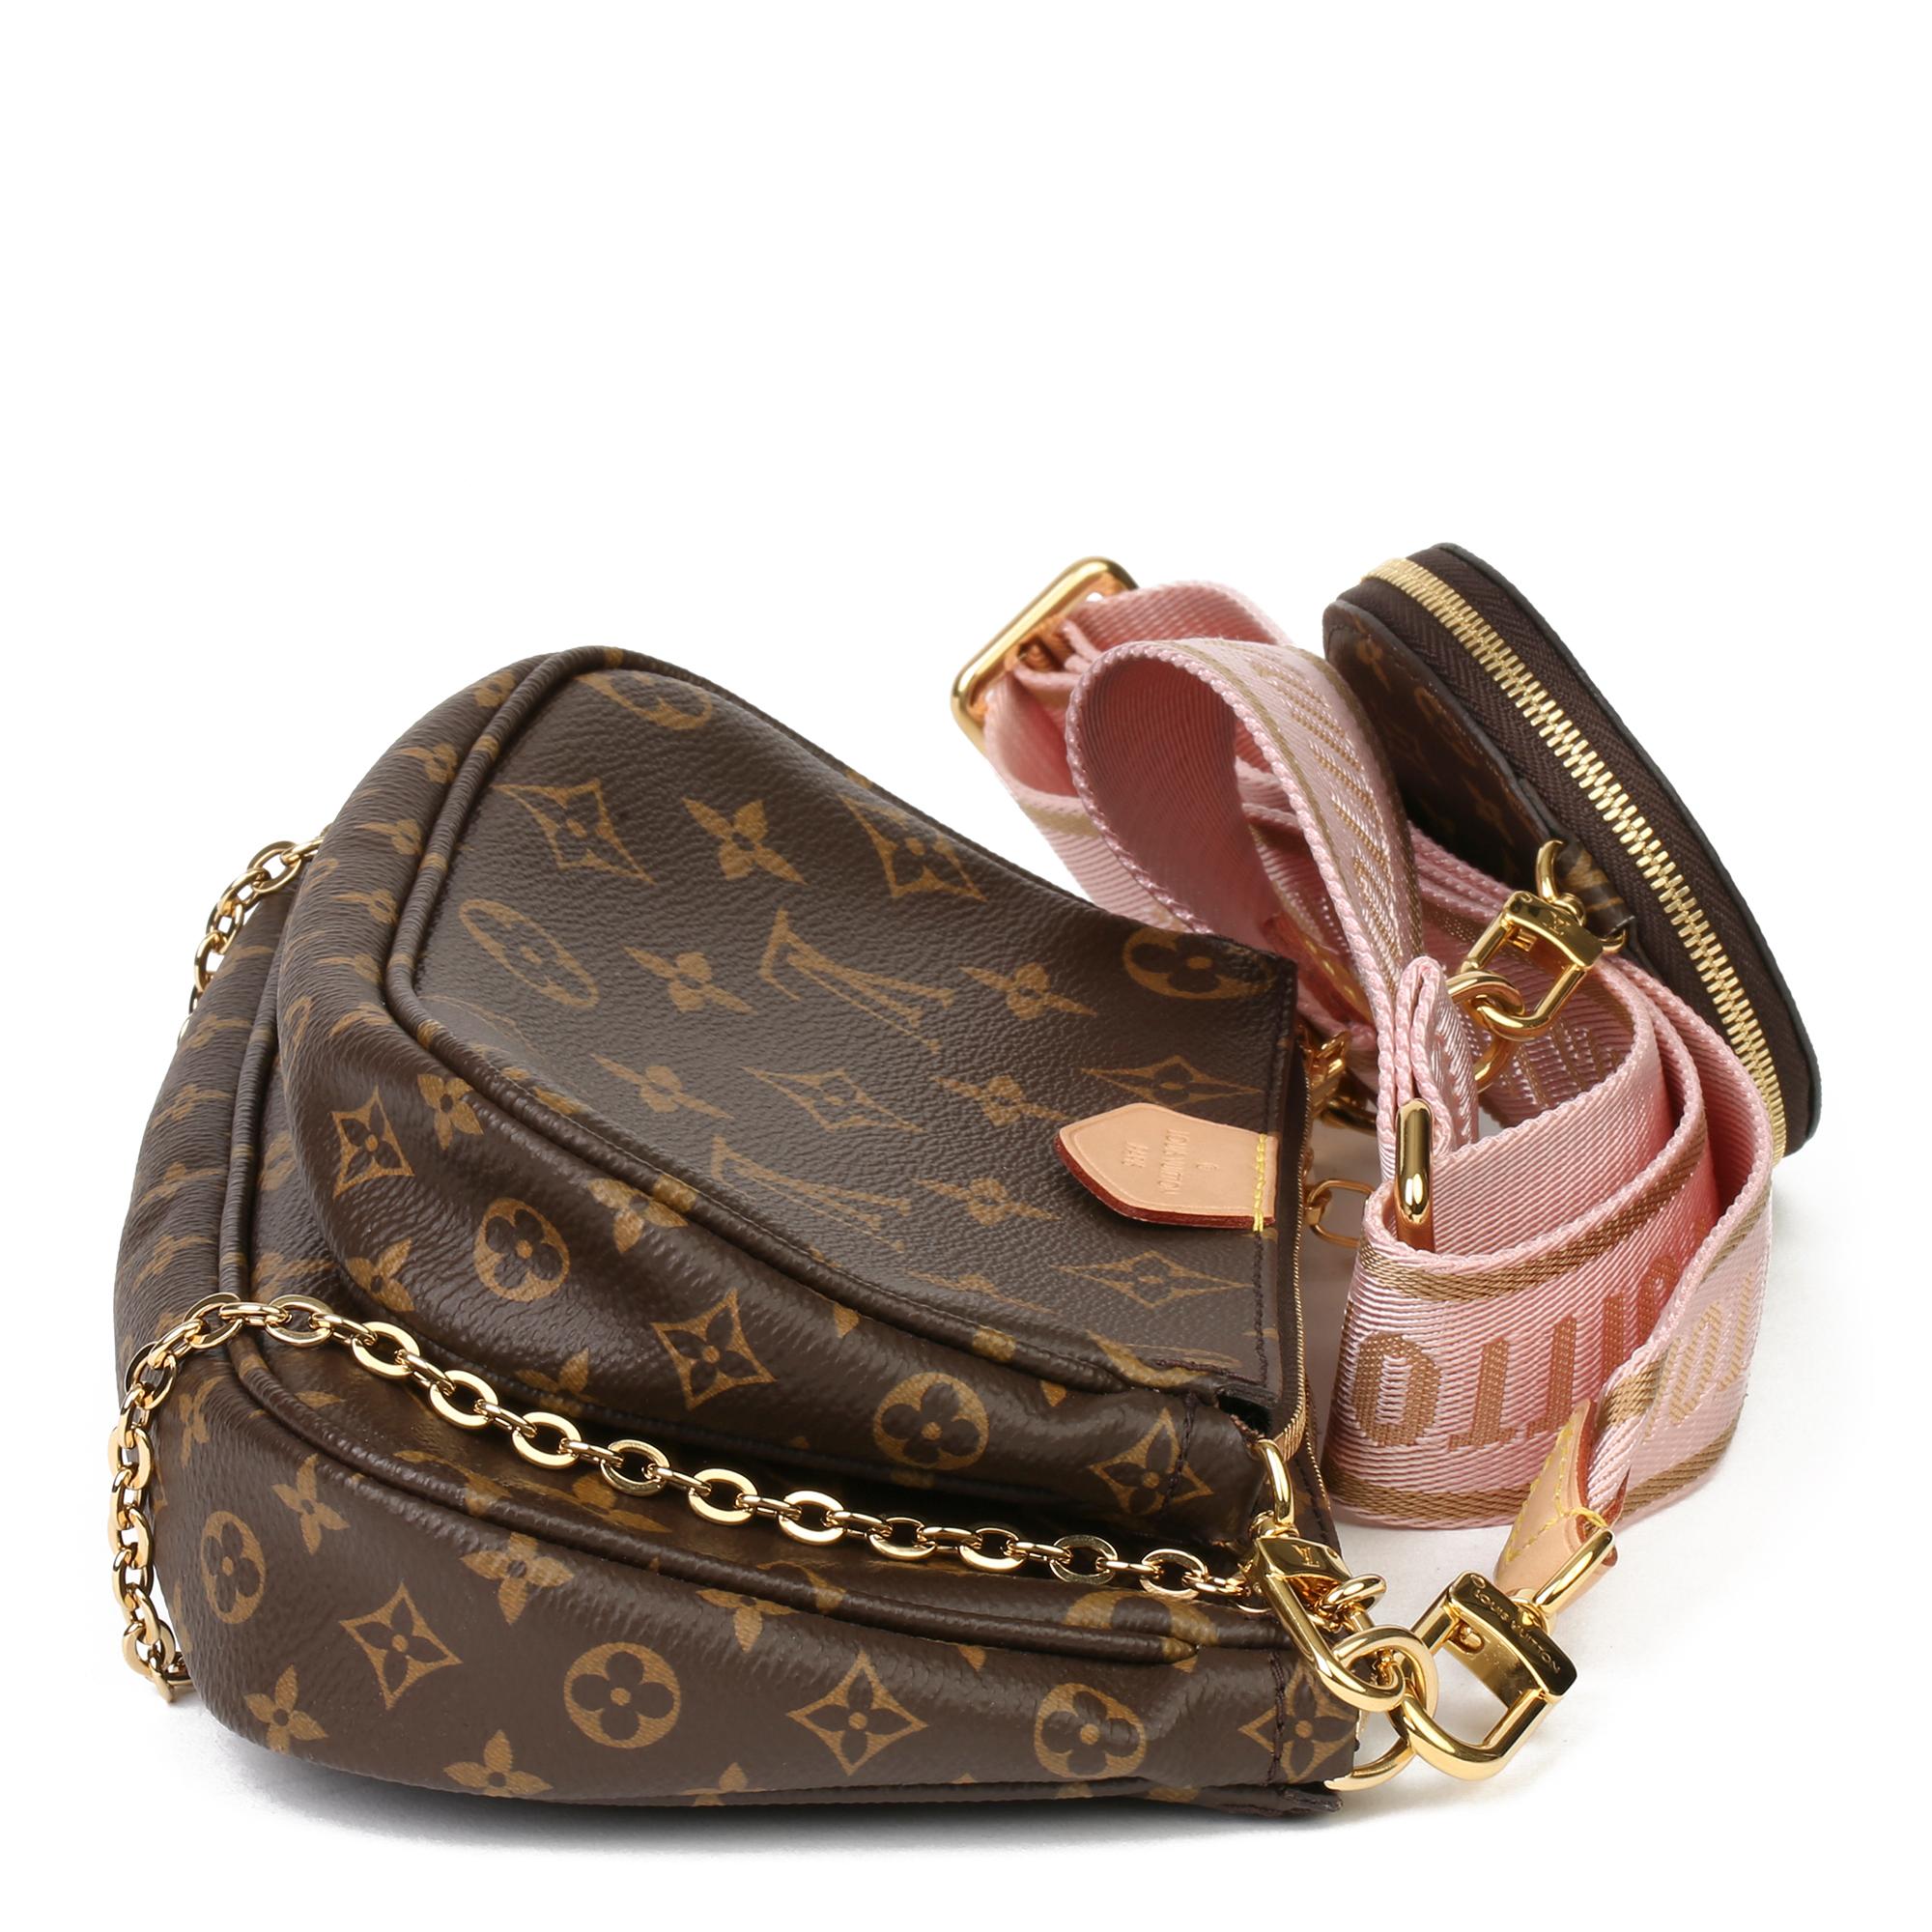 LOUIS VUITTON
Brown Coated Canvas, Chiaro Jacquard Multi Pochette Accessoires

Xupes Reference: HB3864
Serial Number: MB2240
Age (Circa): 2020
Accompanied By: Louis Vuitton Dust Bag
Authenticity Details: Date Stamp (Made in France)
Gender: